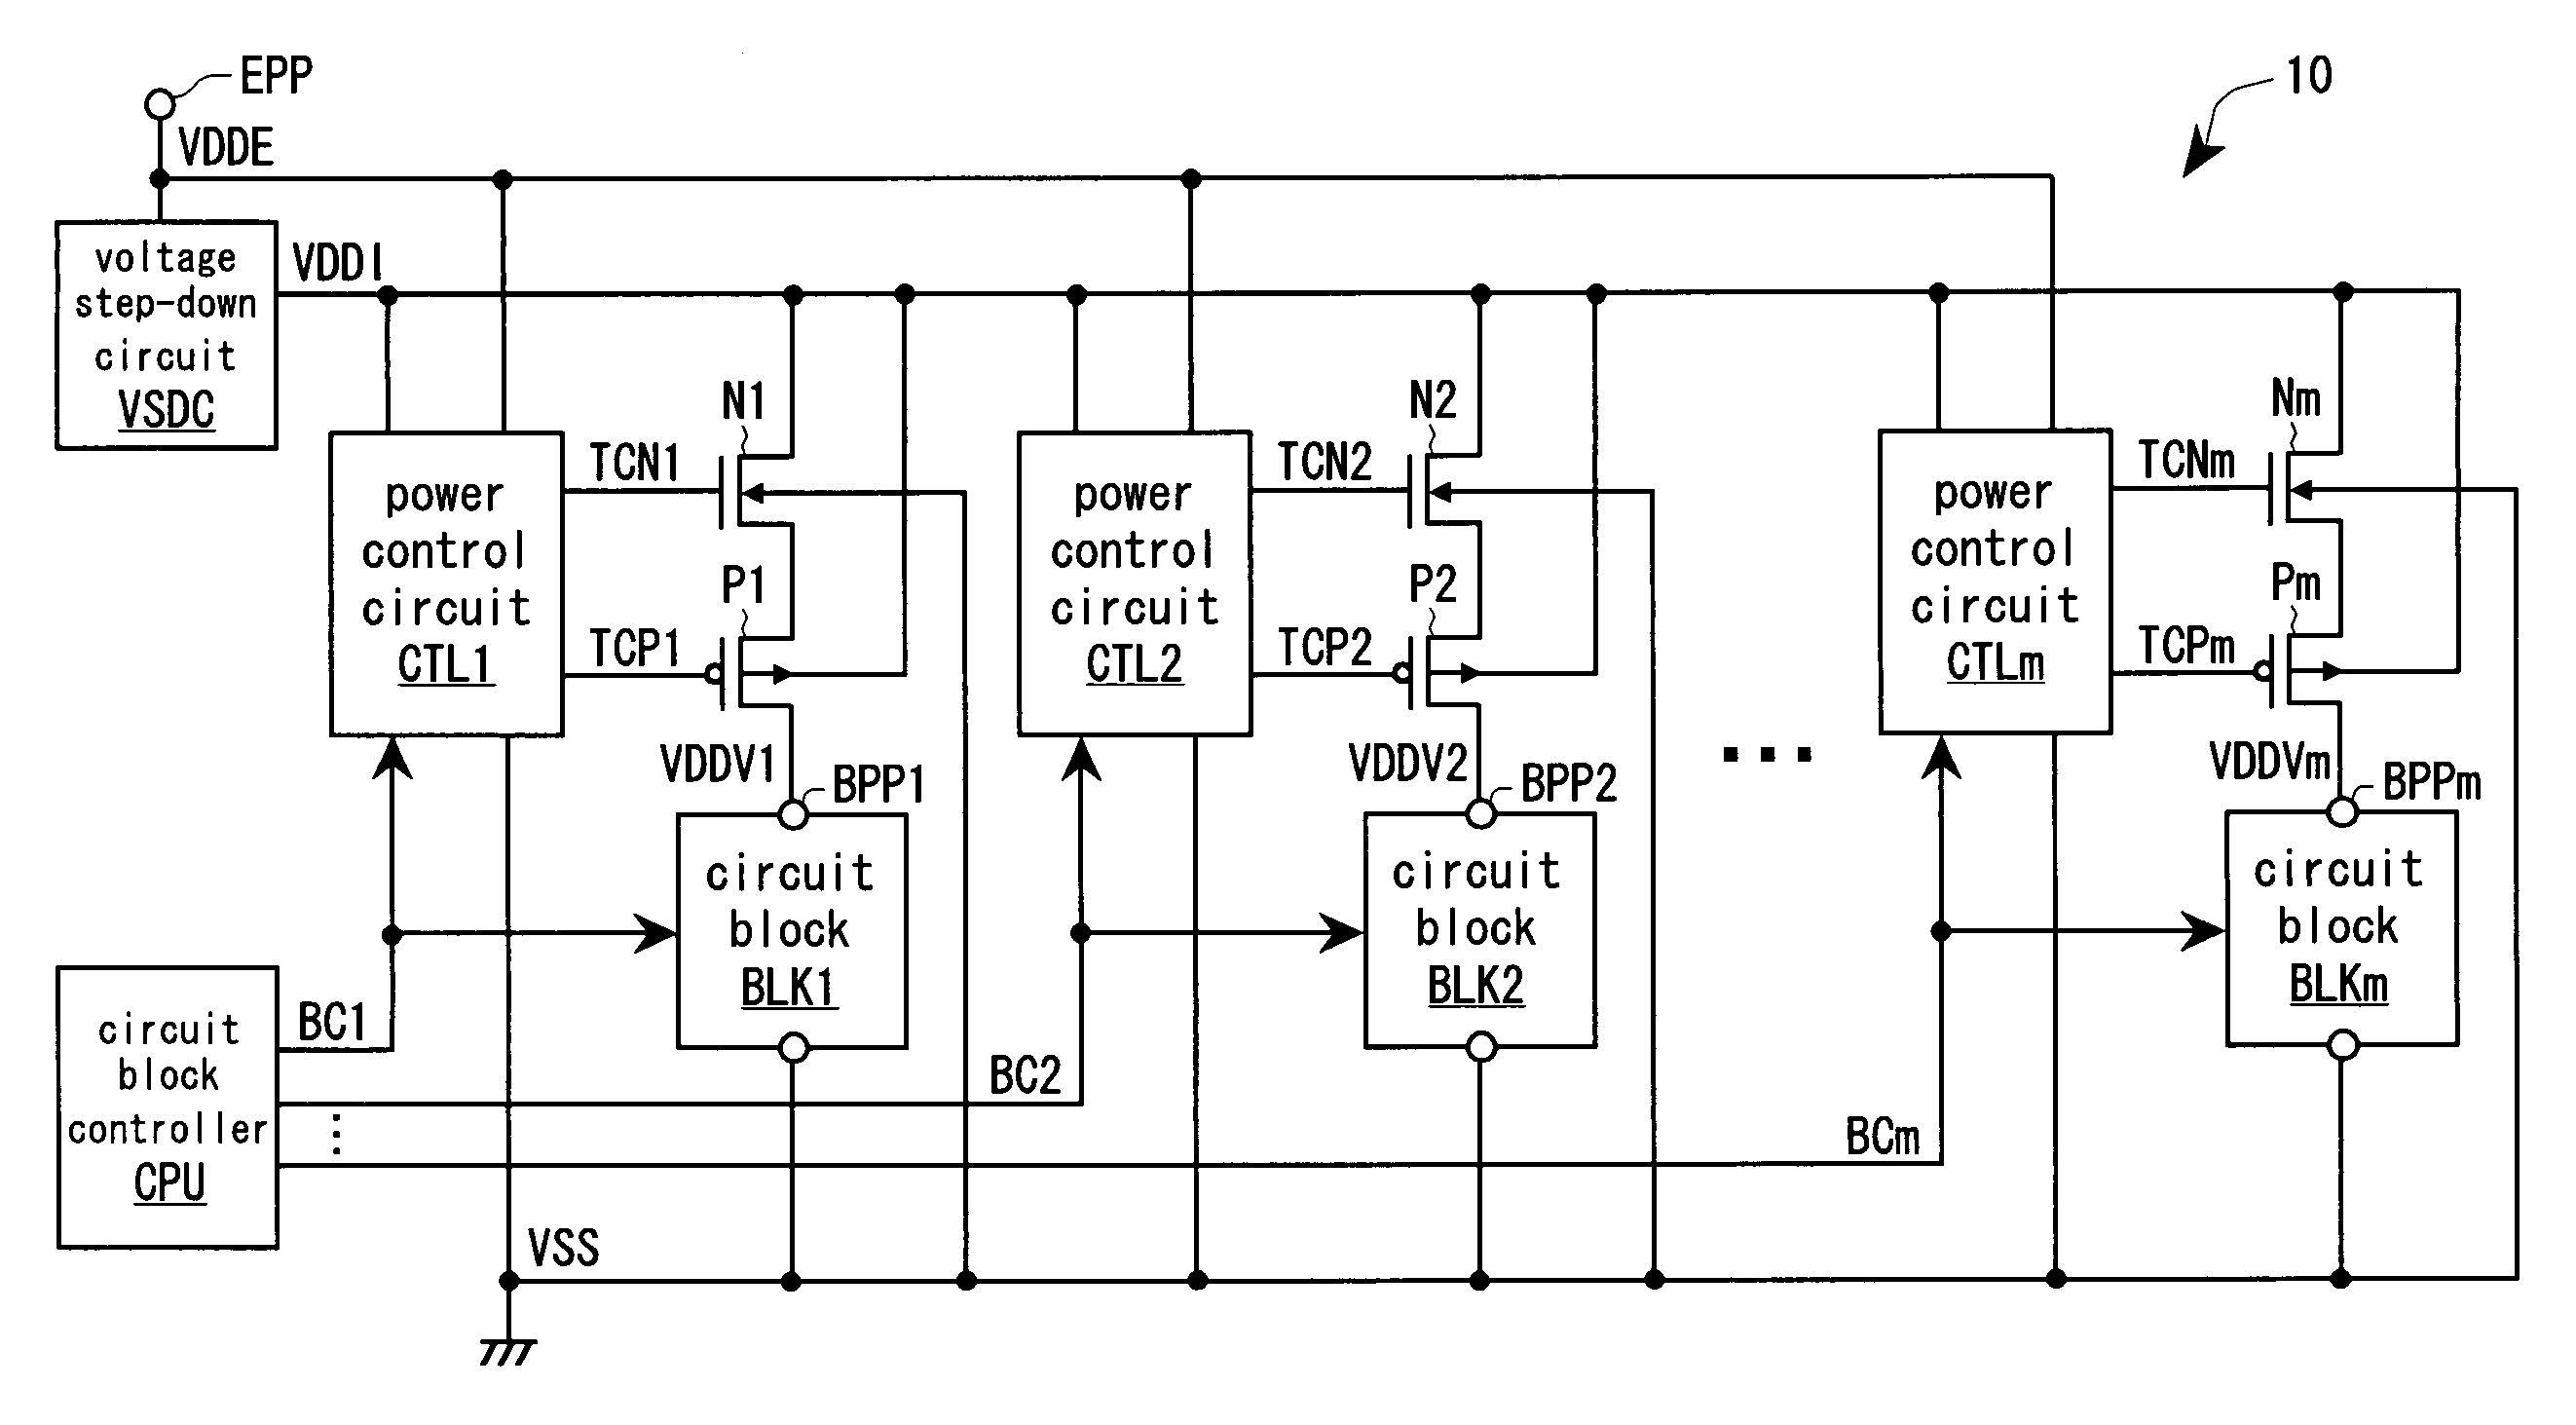 Power control circuit with reduced power consumption